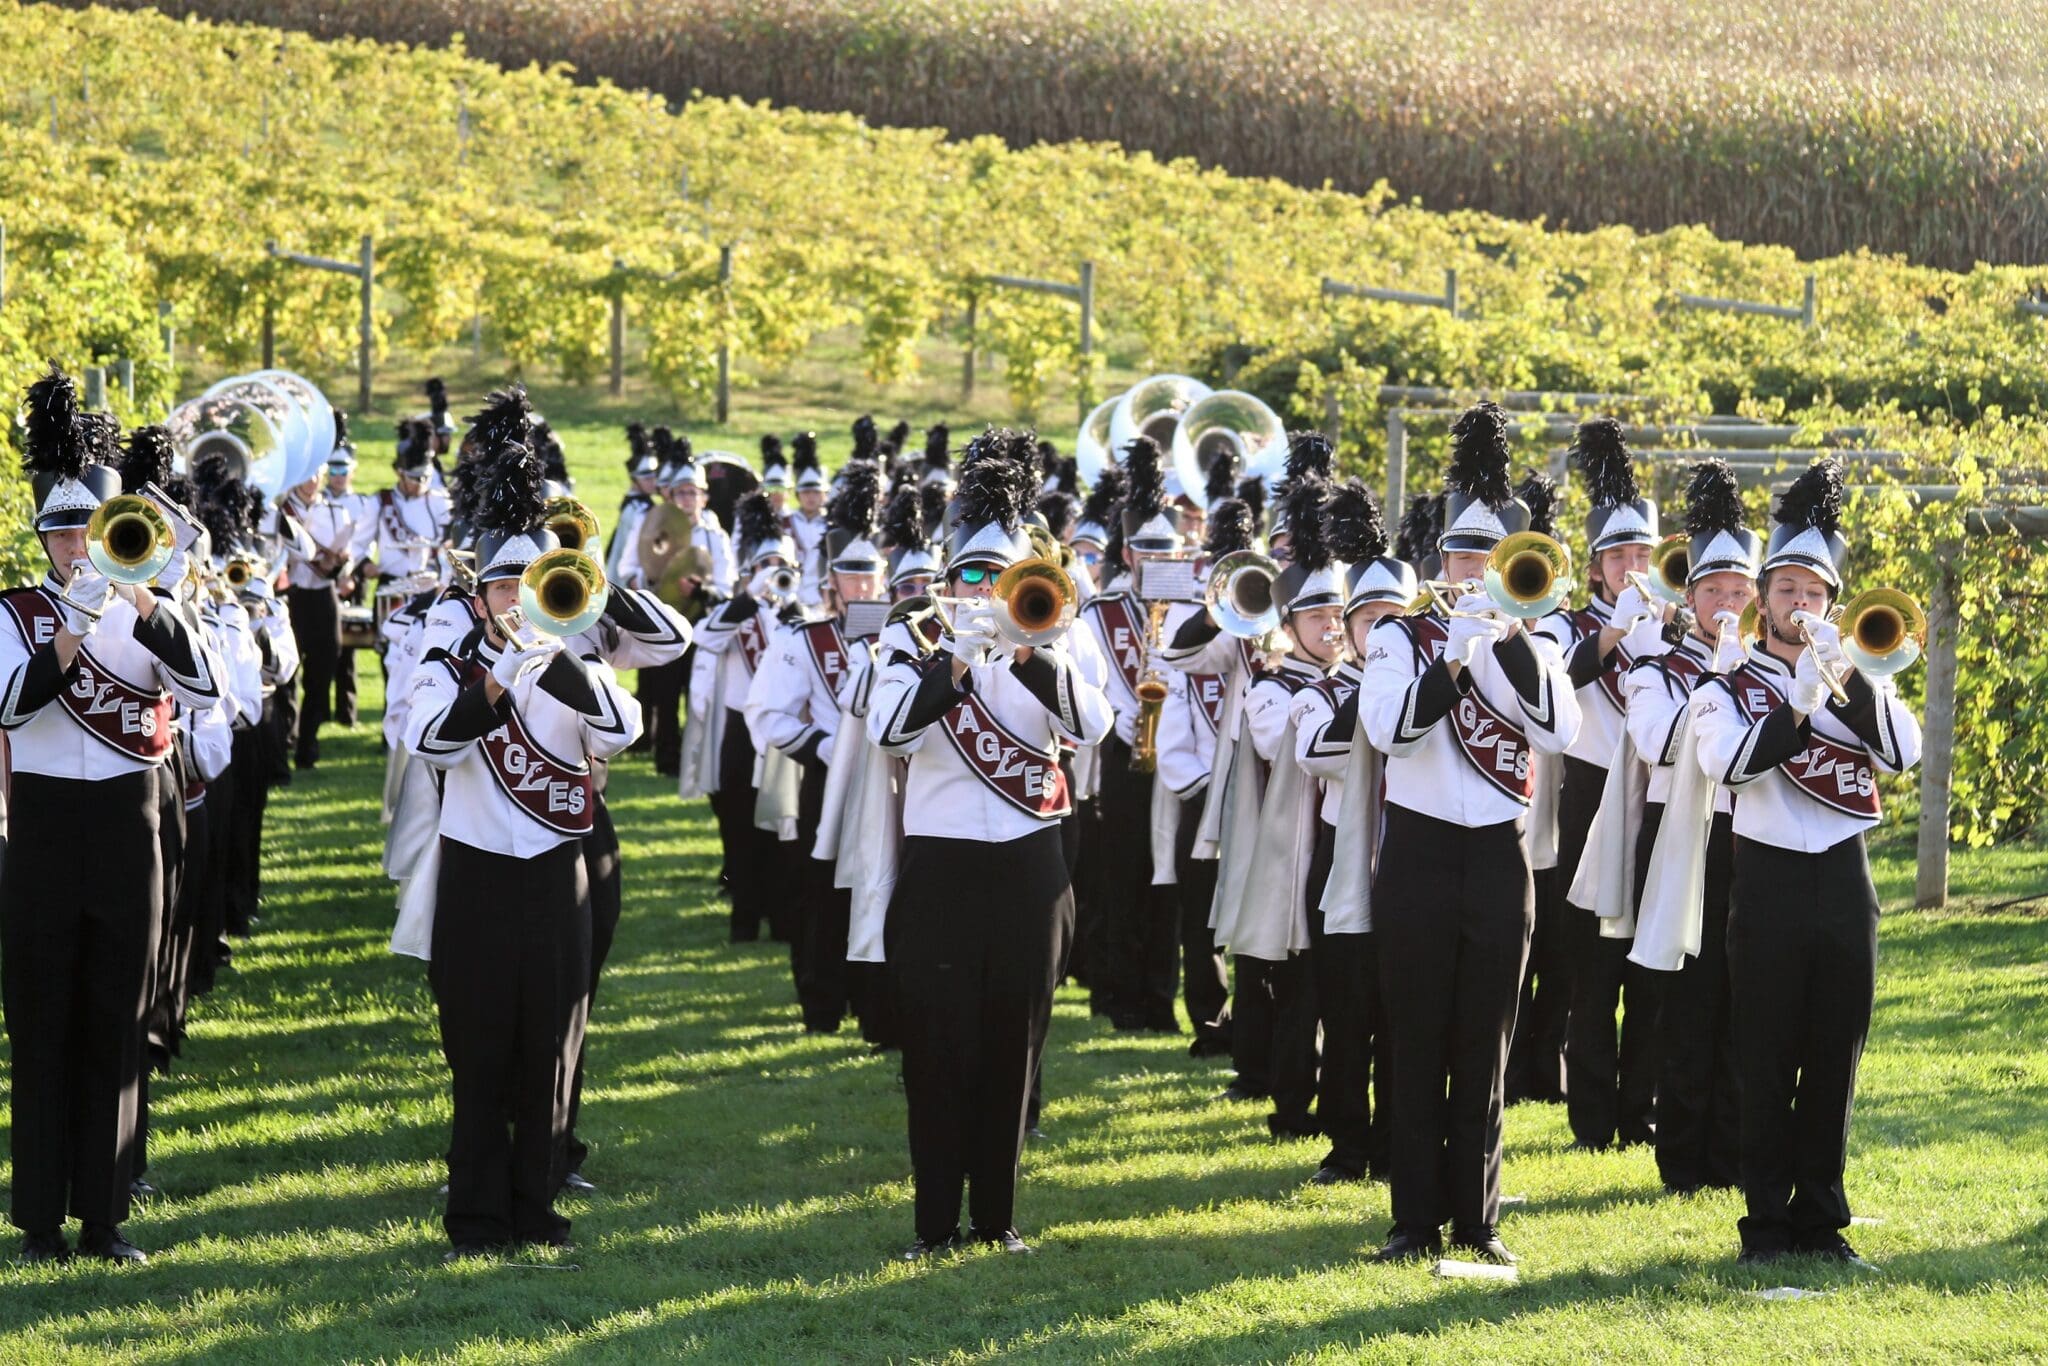 Marching band in front of a vineyard.